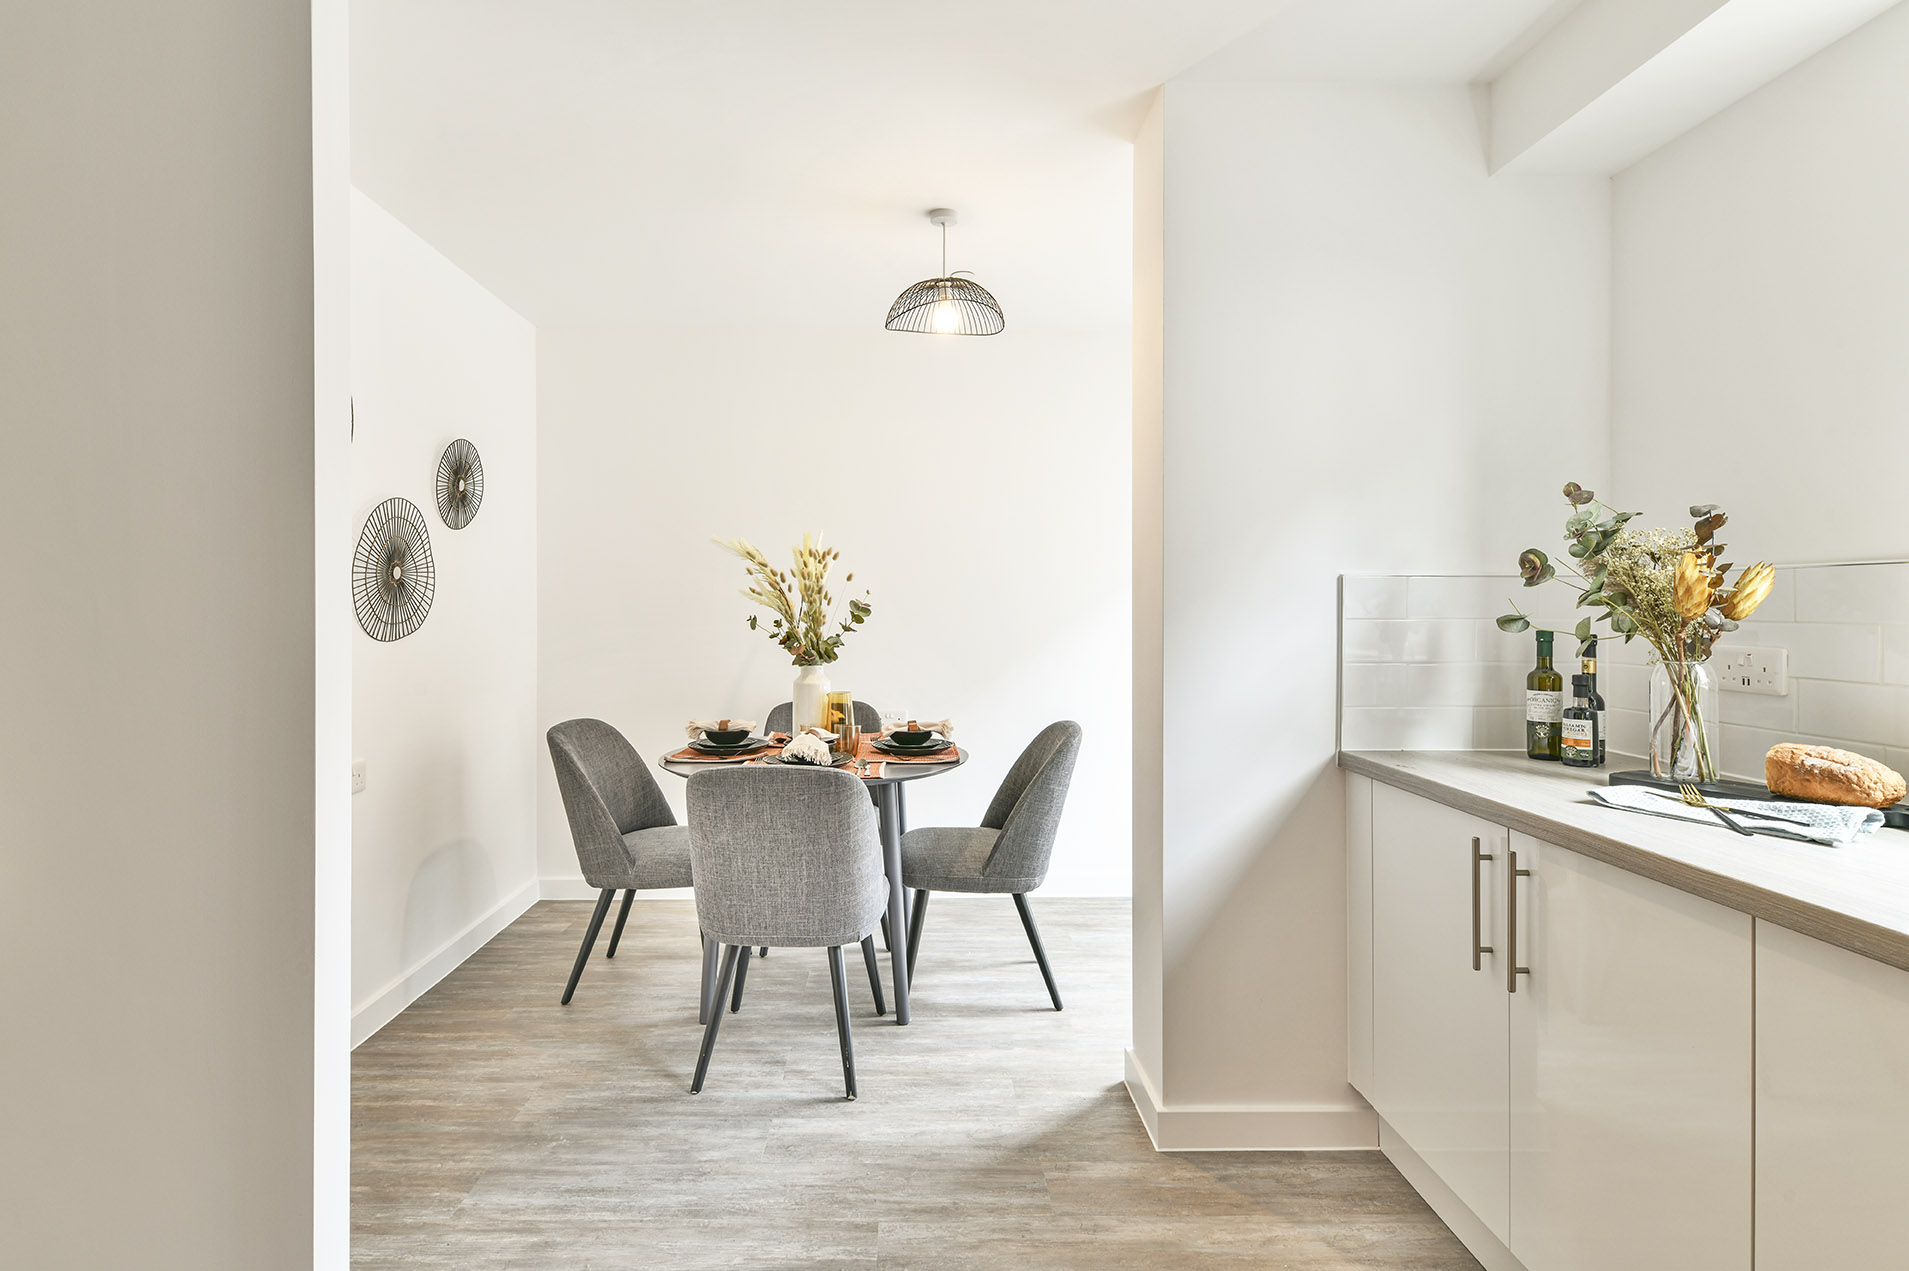 Apartments and houses to Rent by Touchstone Resi in The Blockhouse, Brighton, BN1, kitchen dining area